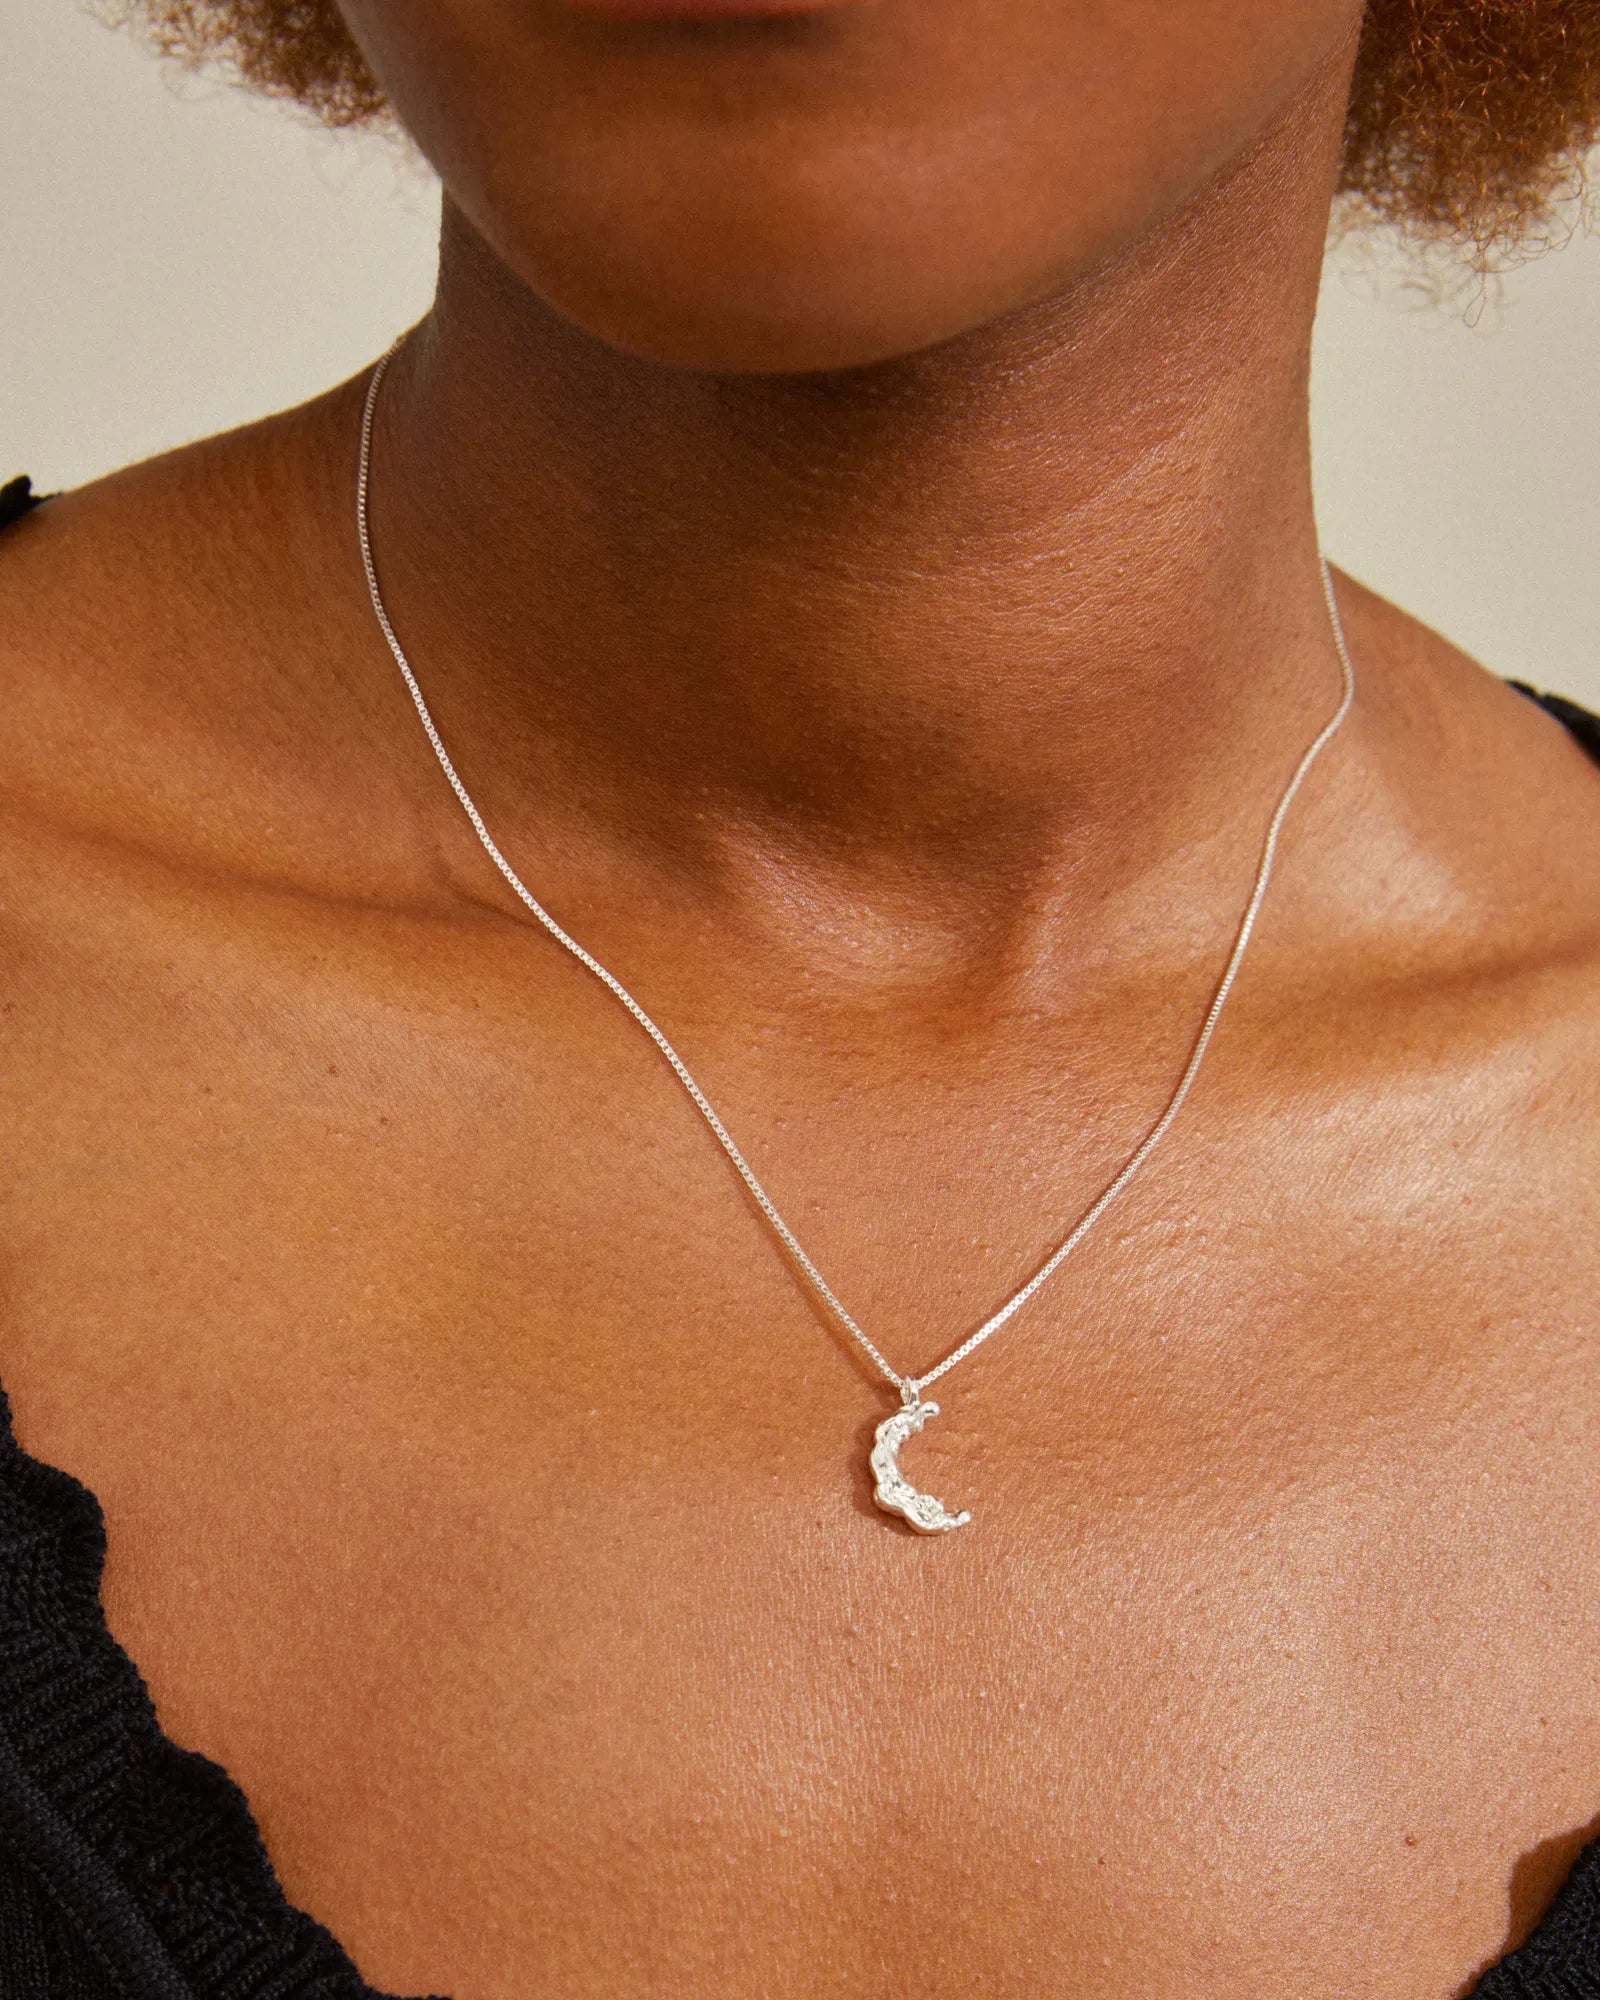 REMY Recycled Necklace - Silver Plated